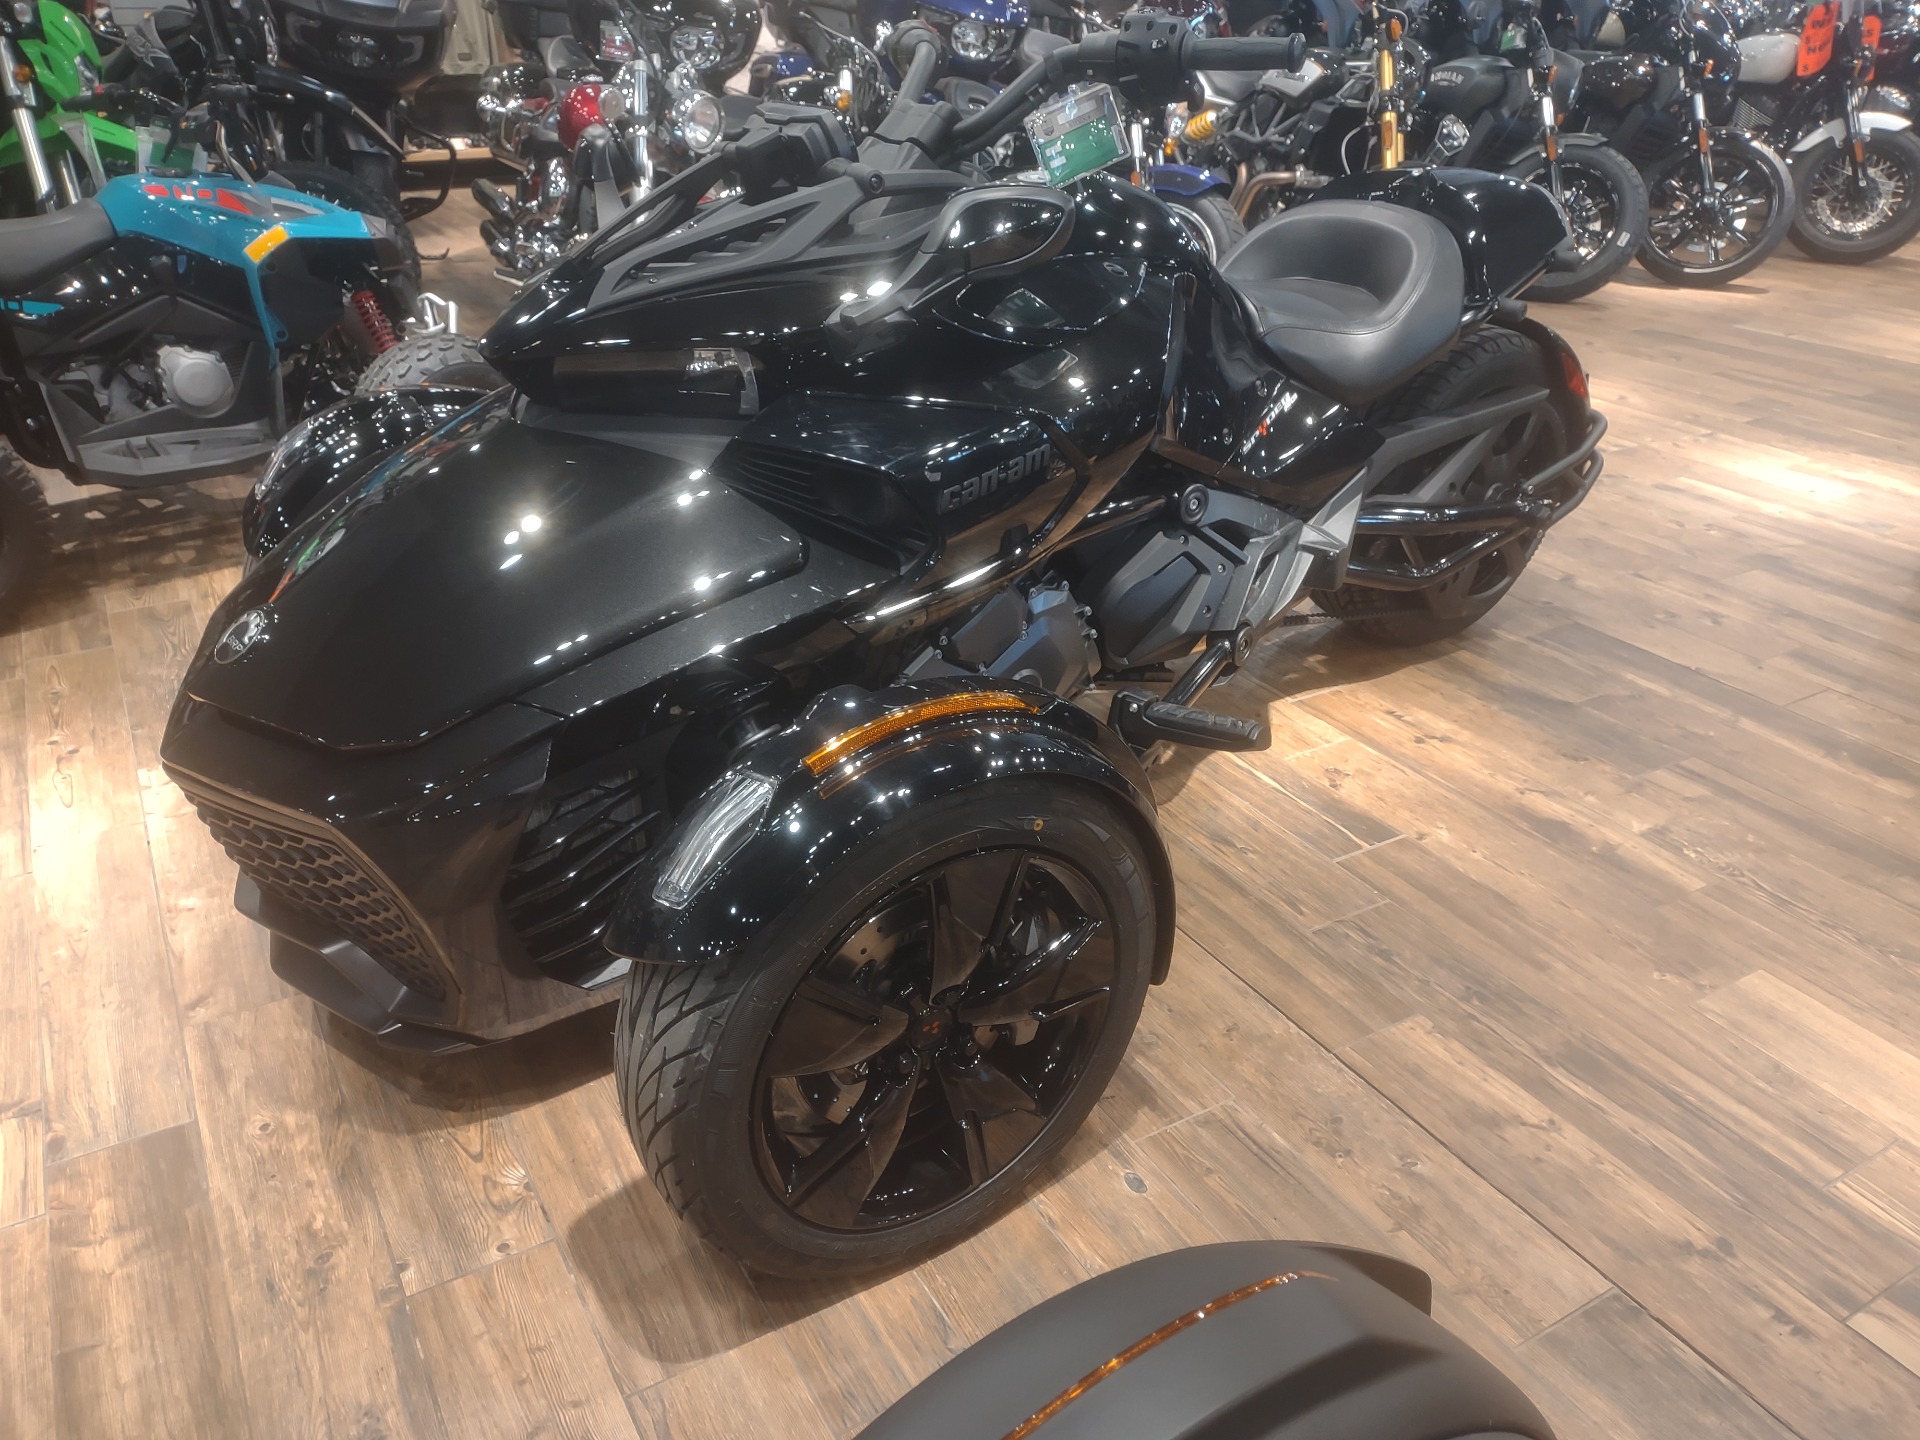 2022 Can-Am Spyder F3 in Mineral Wells, West Virginia - Photo 3